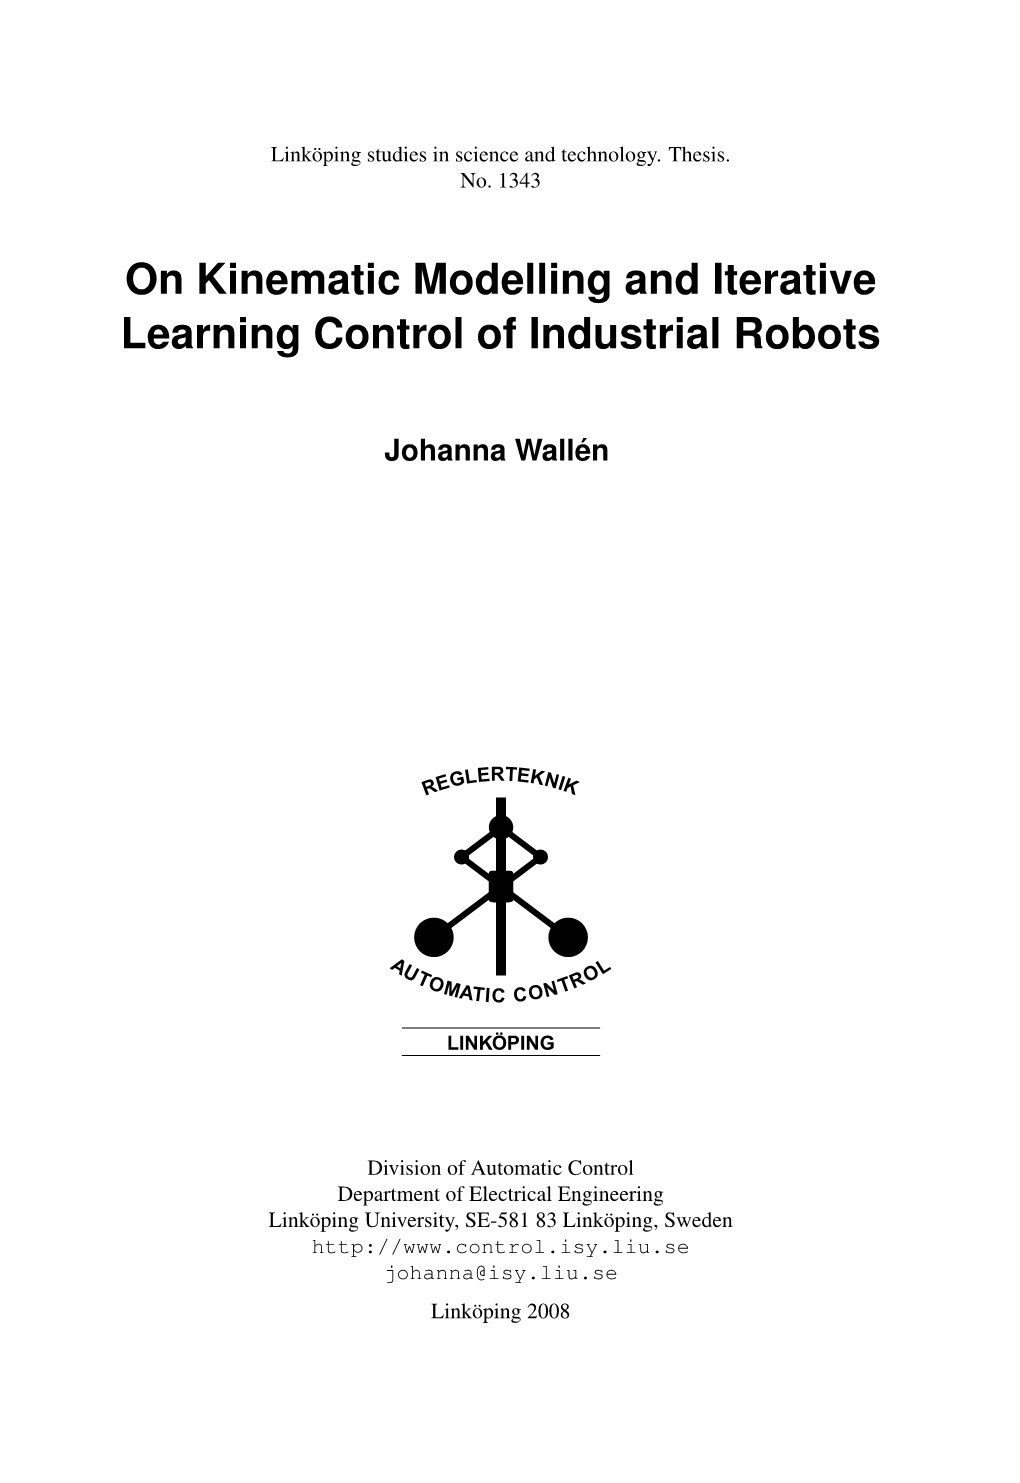 On Kinematic Modelling and Iterative Learning Control of Industrial Robots